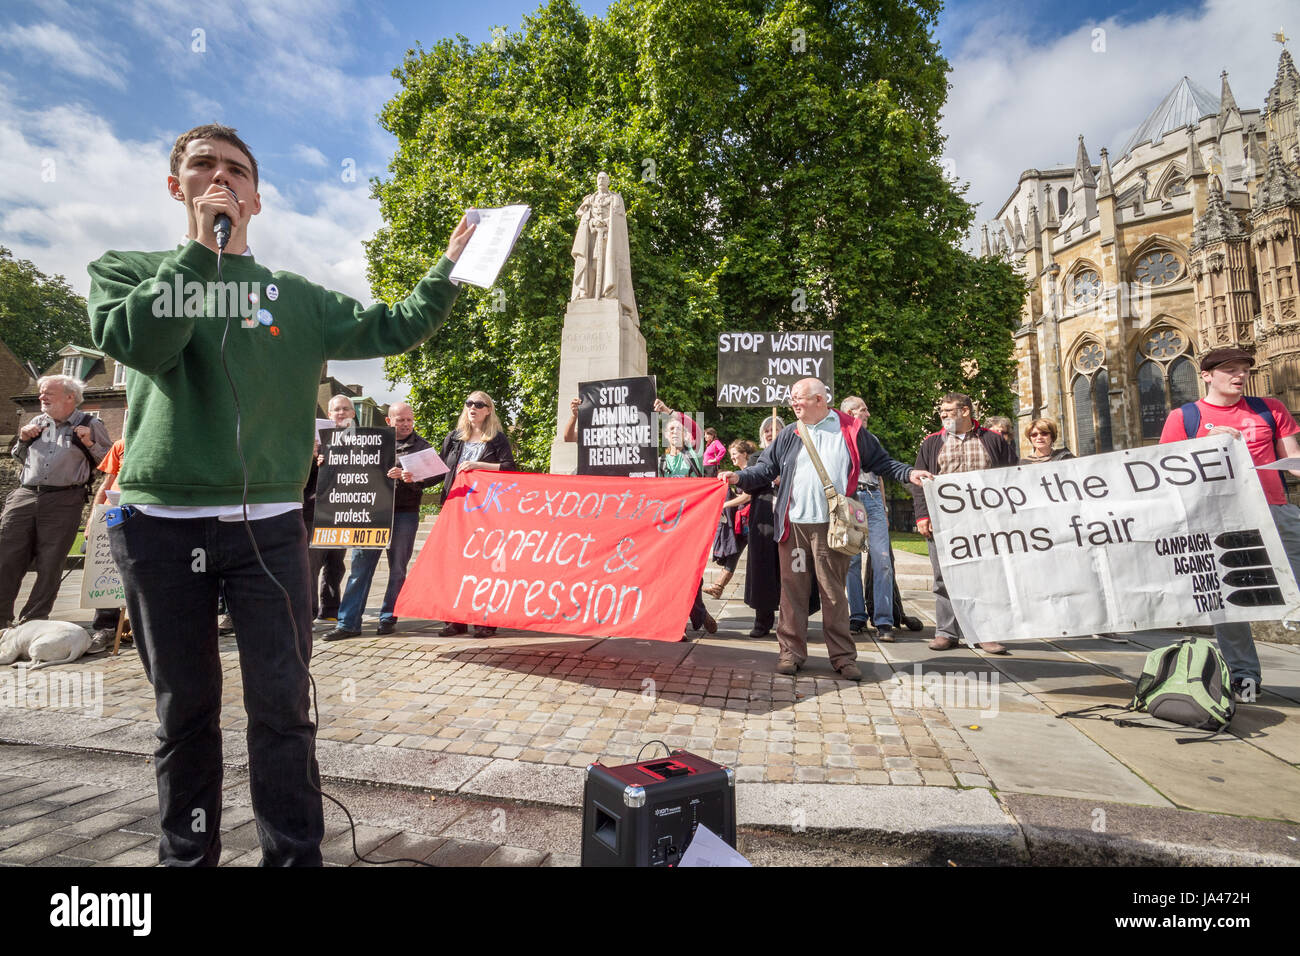 Stop the Arms Fair. Anti-war protesters outside Parliament Buildings in London, UK. Stock Photo